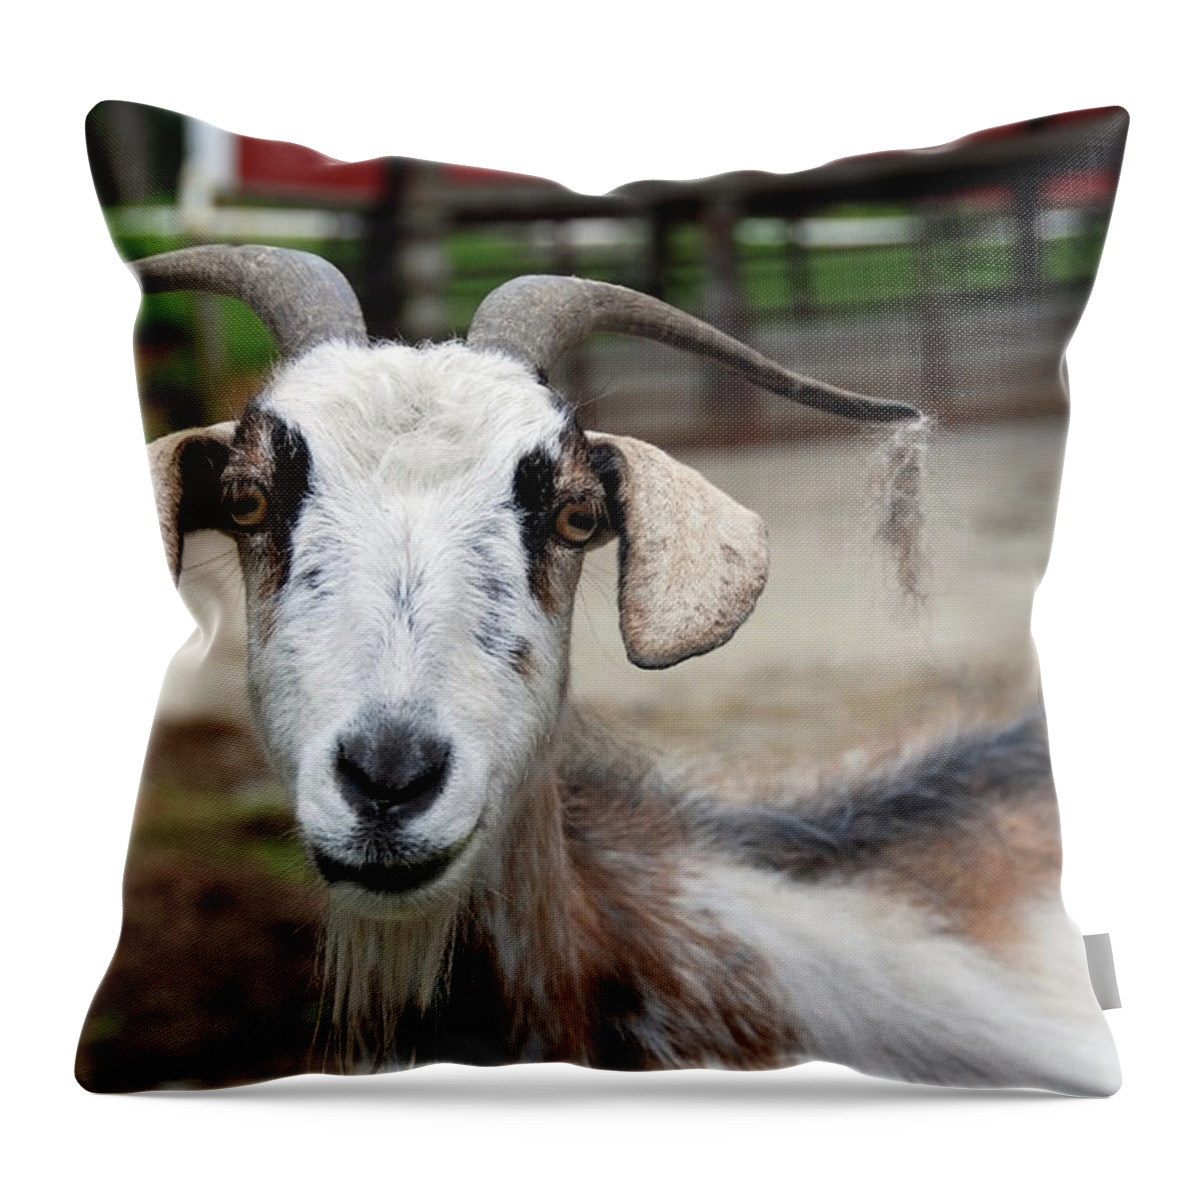 Horned Throw Pillow featuring the photograph Smiling Billy Goat by Tito Slack